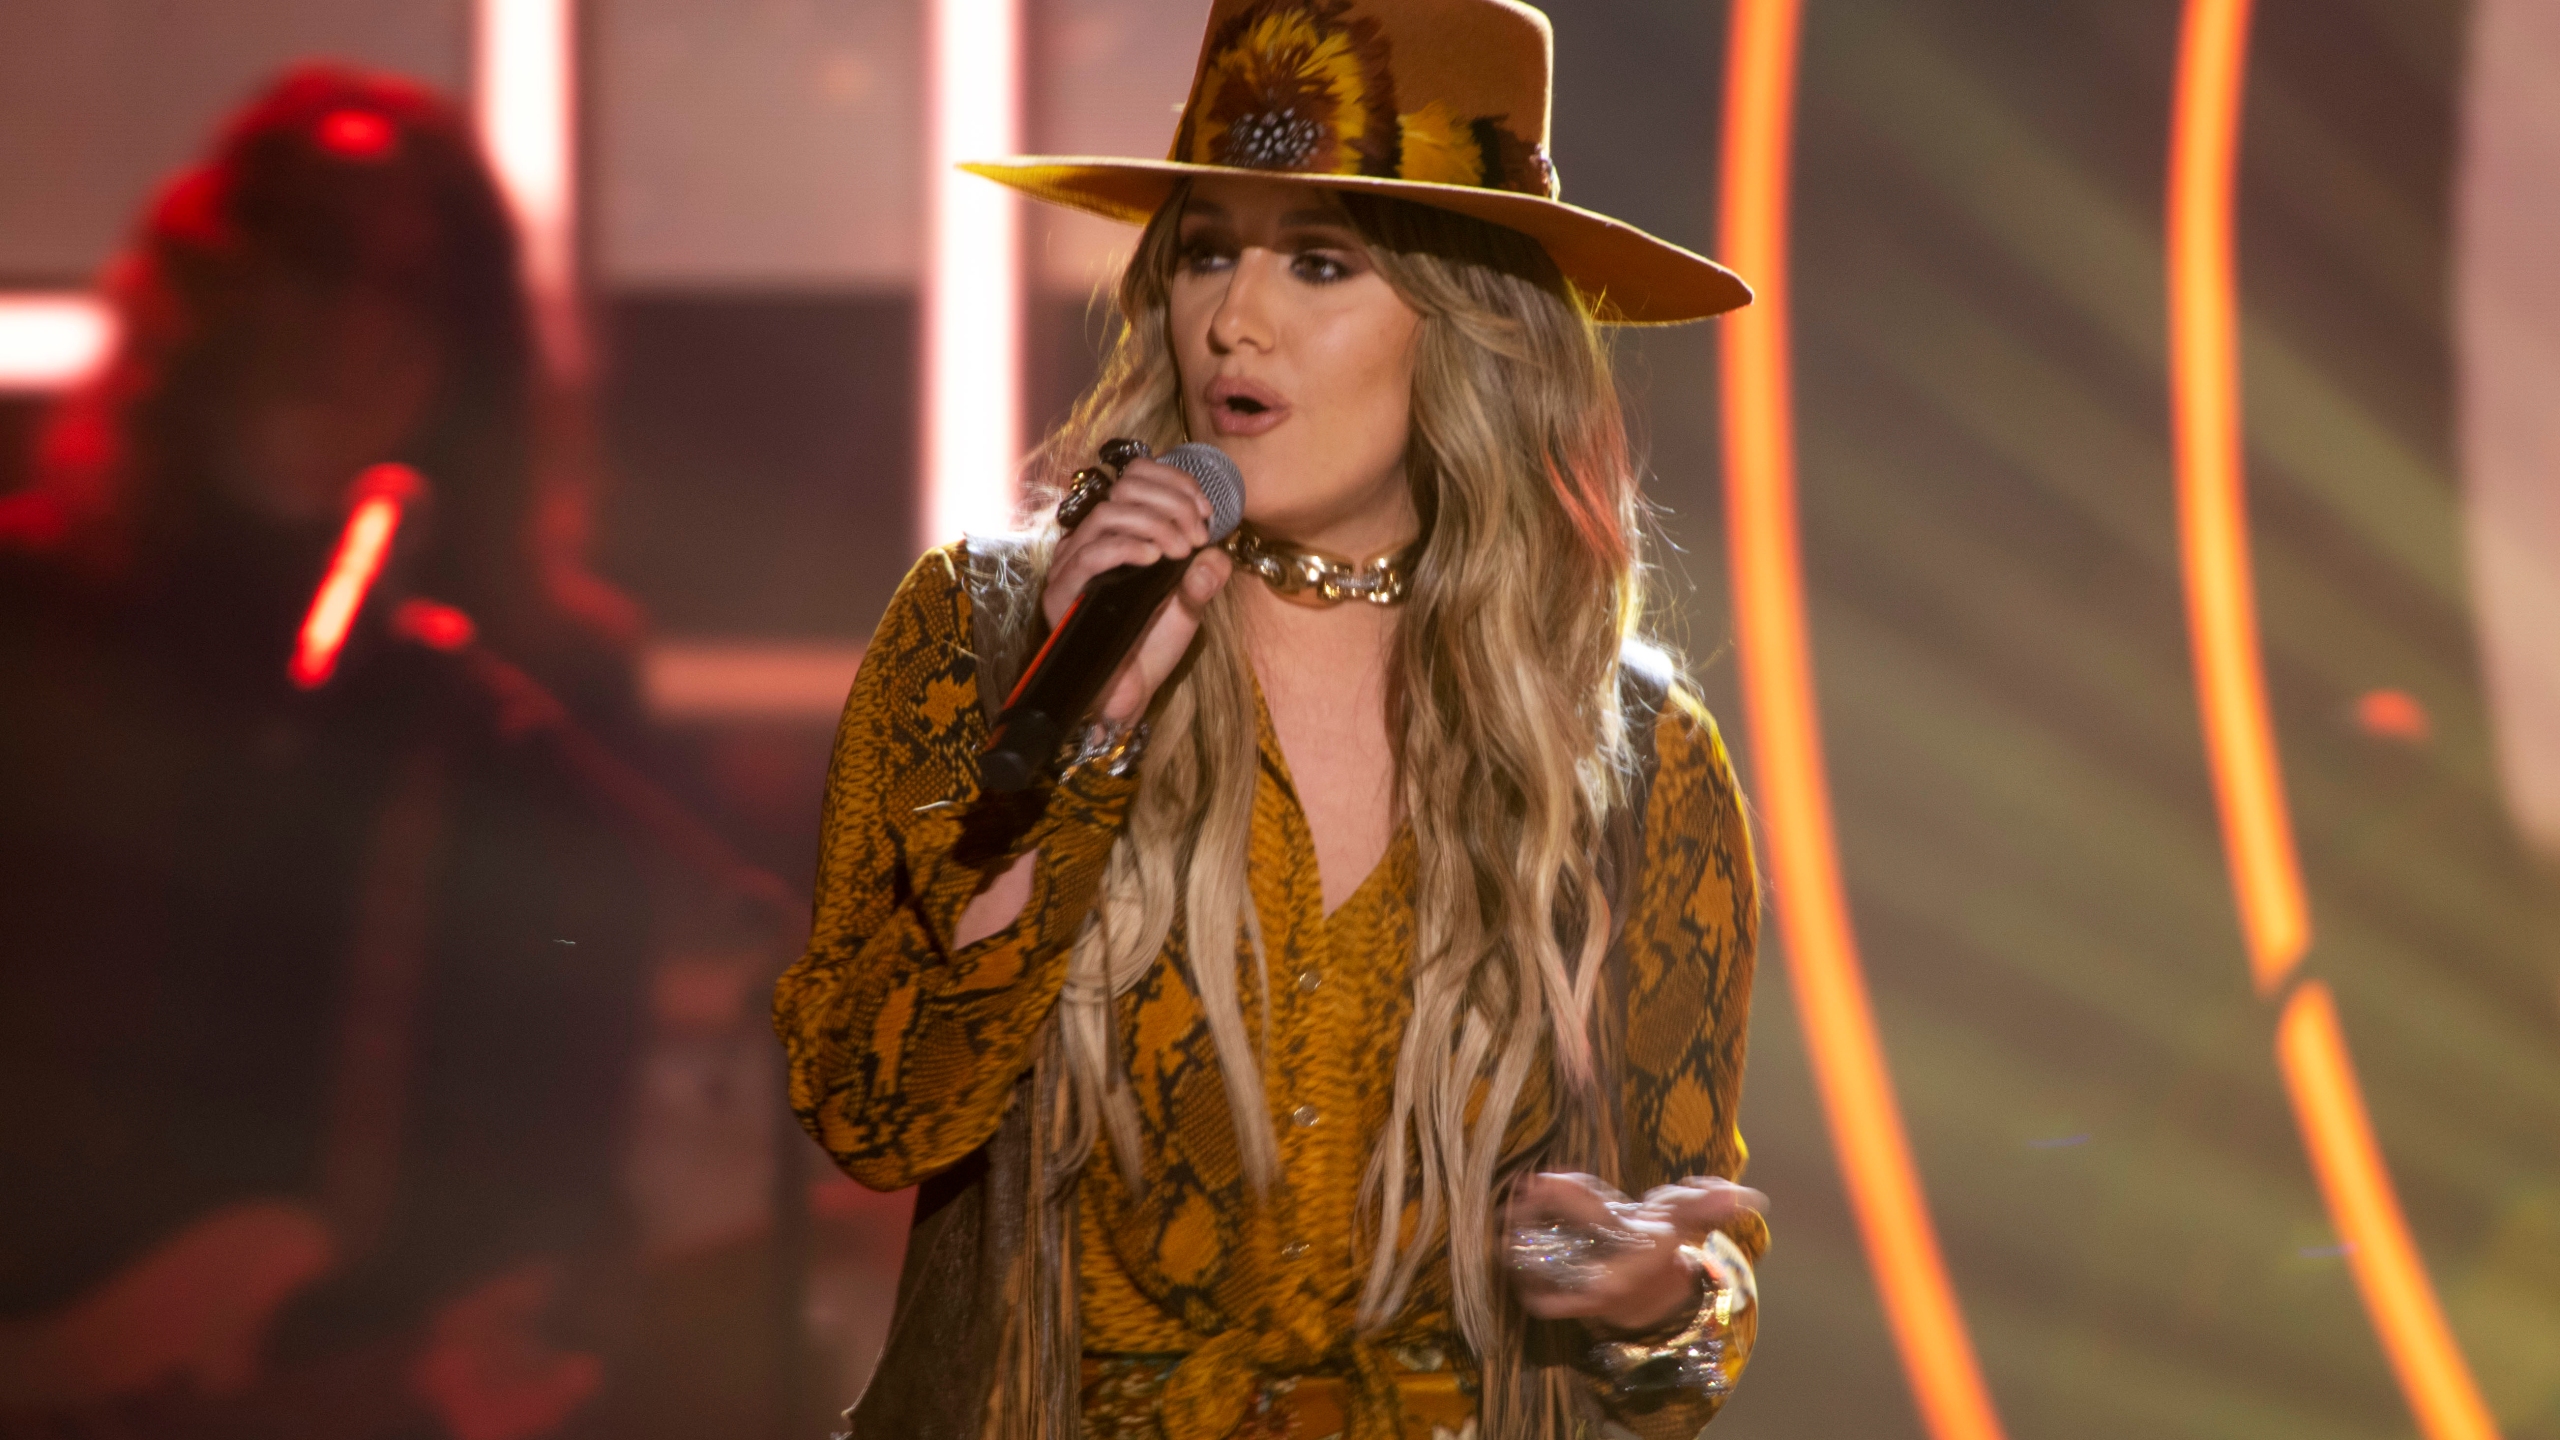 Fan favorite Lainey Wilson leads CMT Music Awards nominees  YourBigSkycom